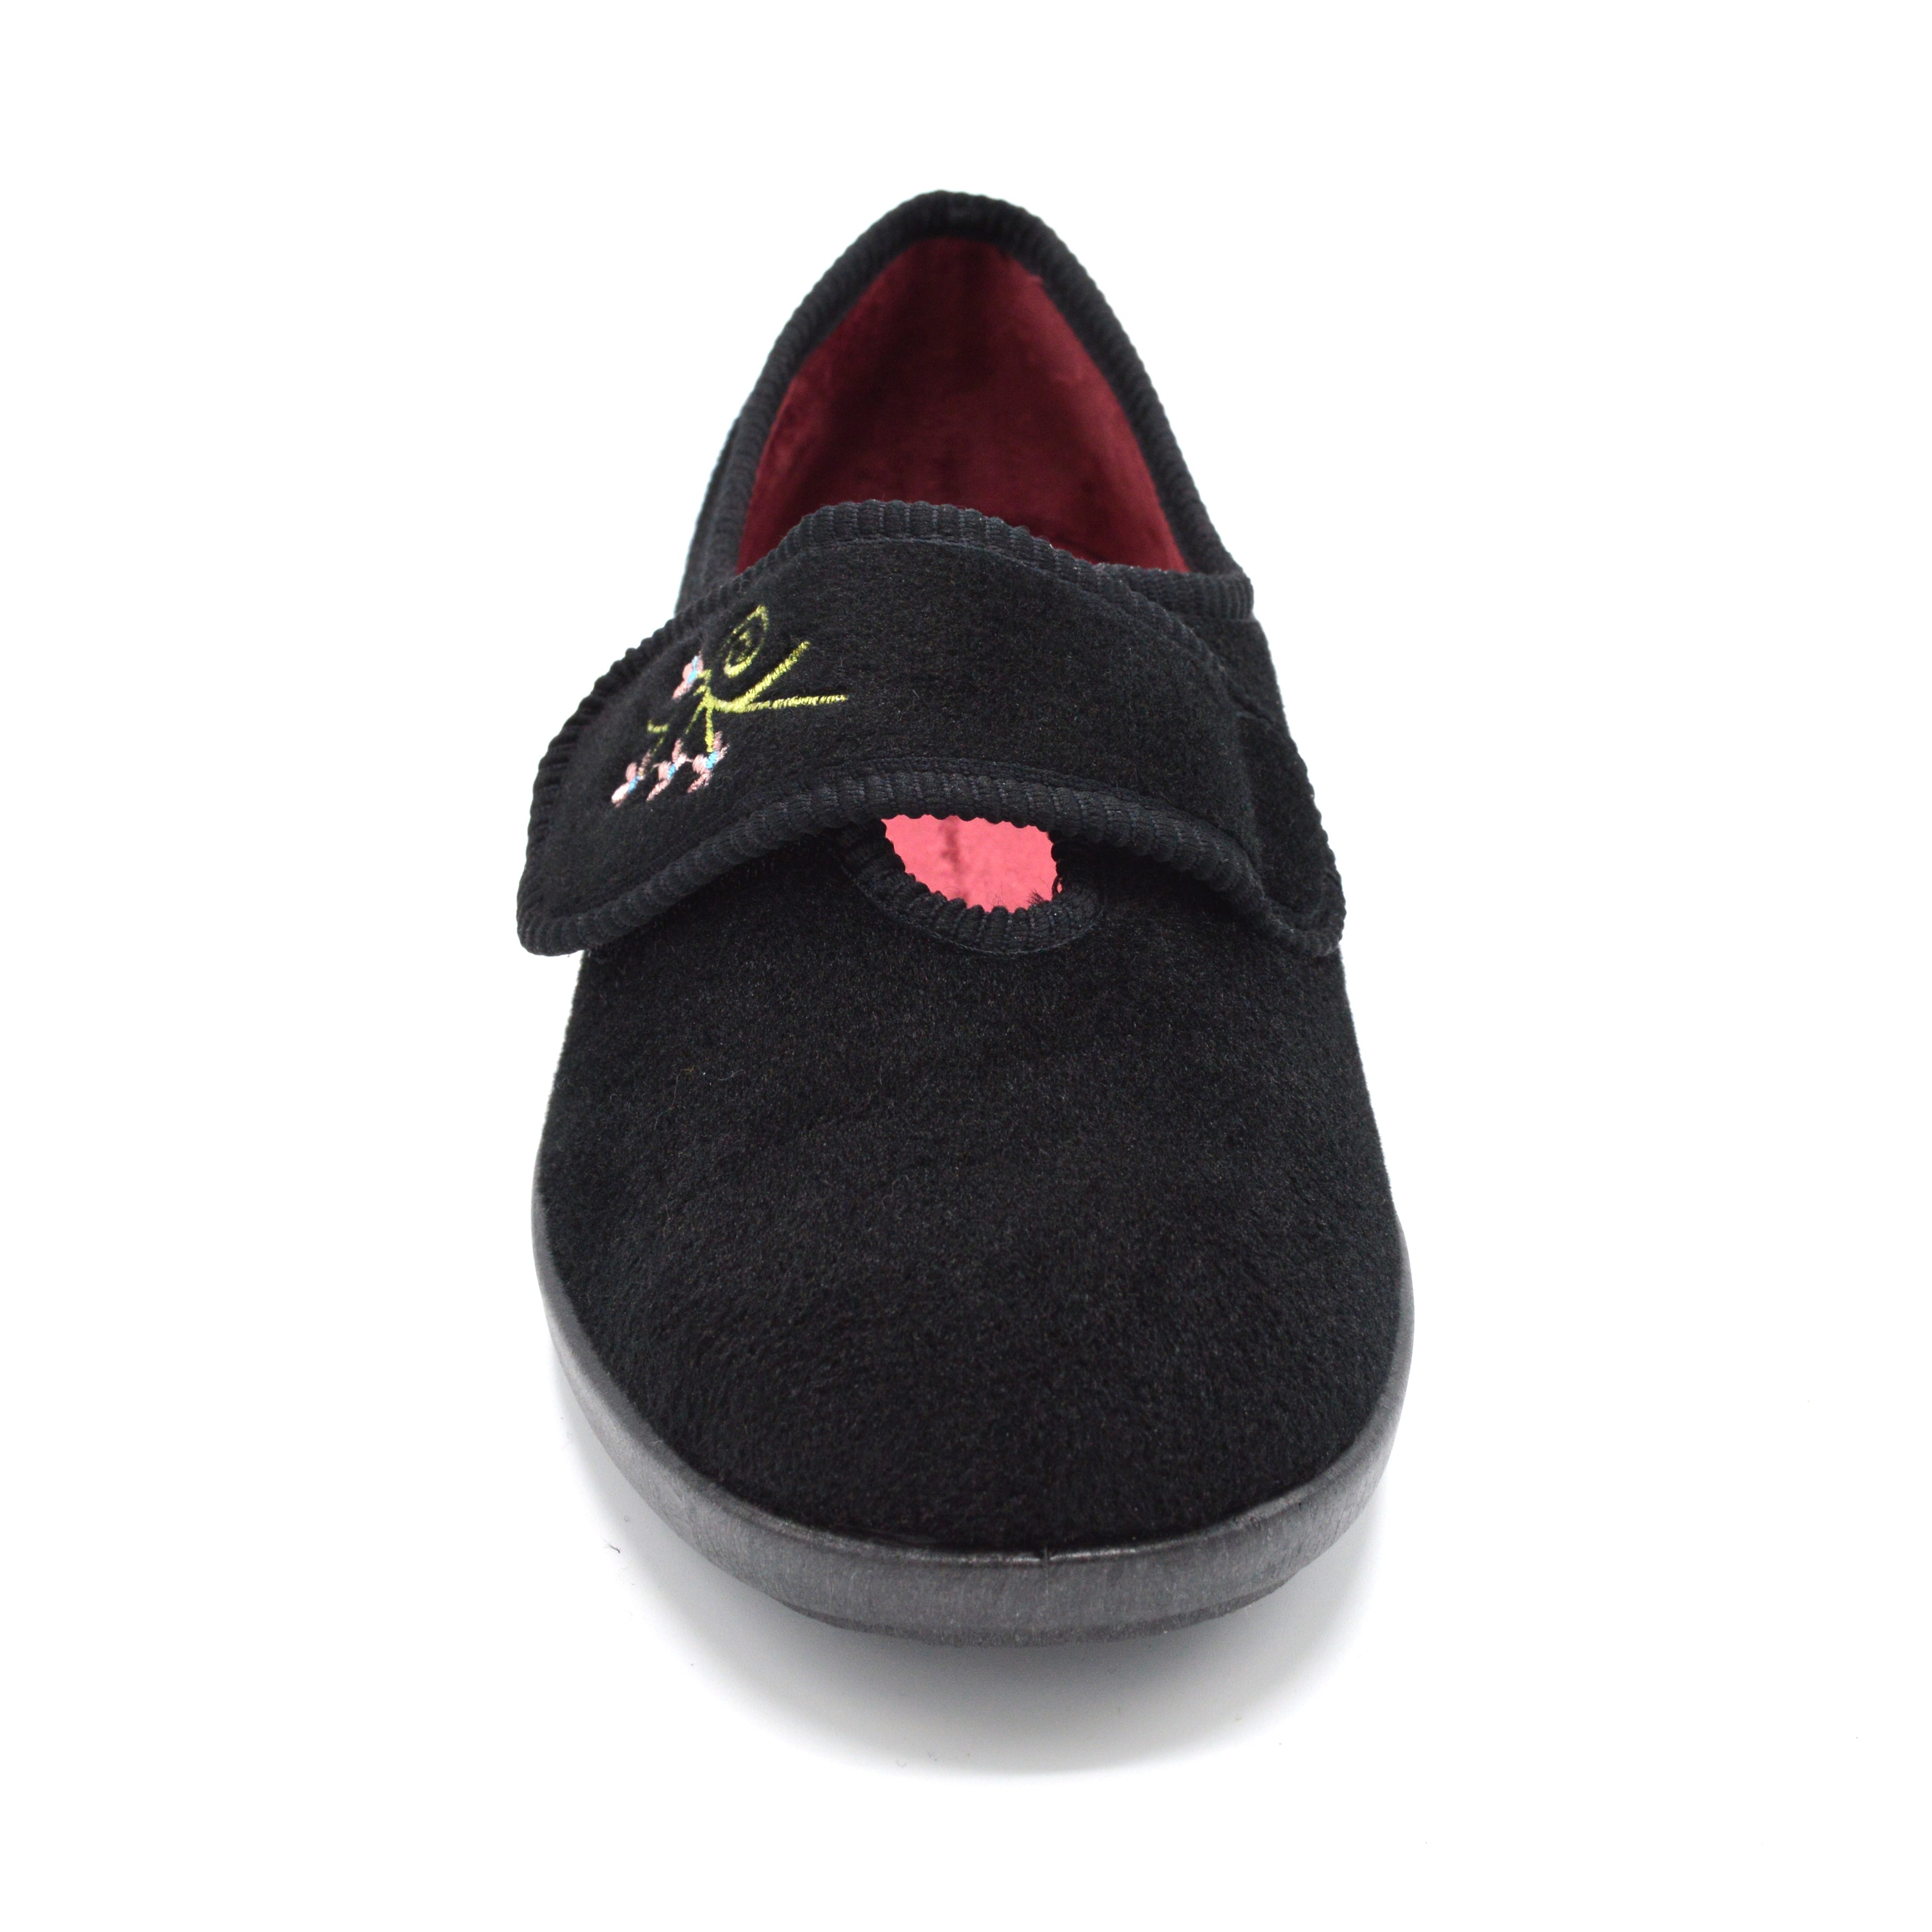 High-Quality Velcro Slippers For Swollen Feet